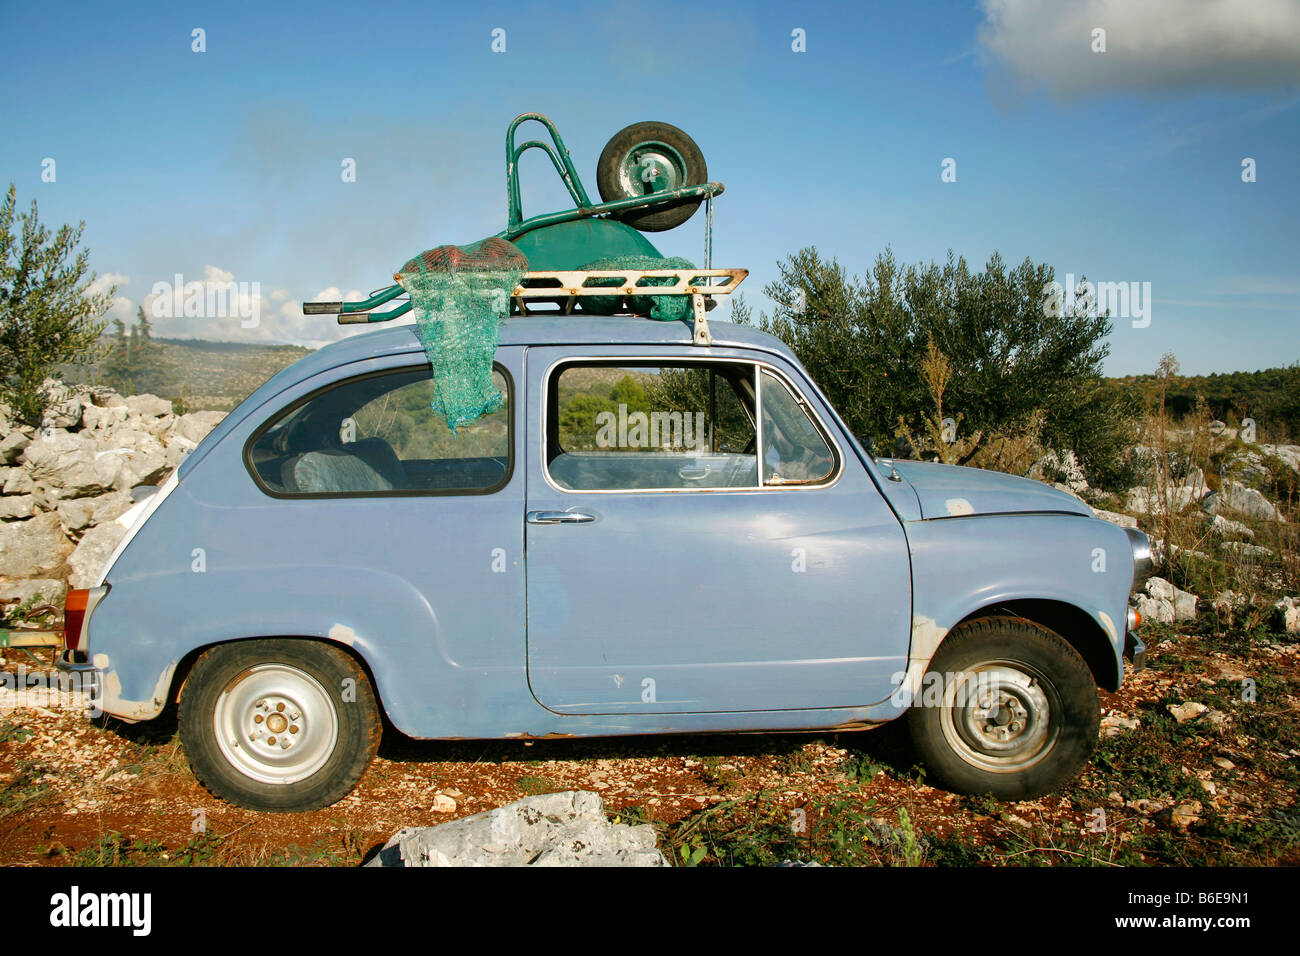 Little blue car with wheel barrow on roof Stock Photo